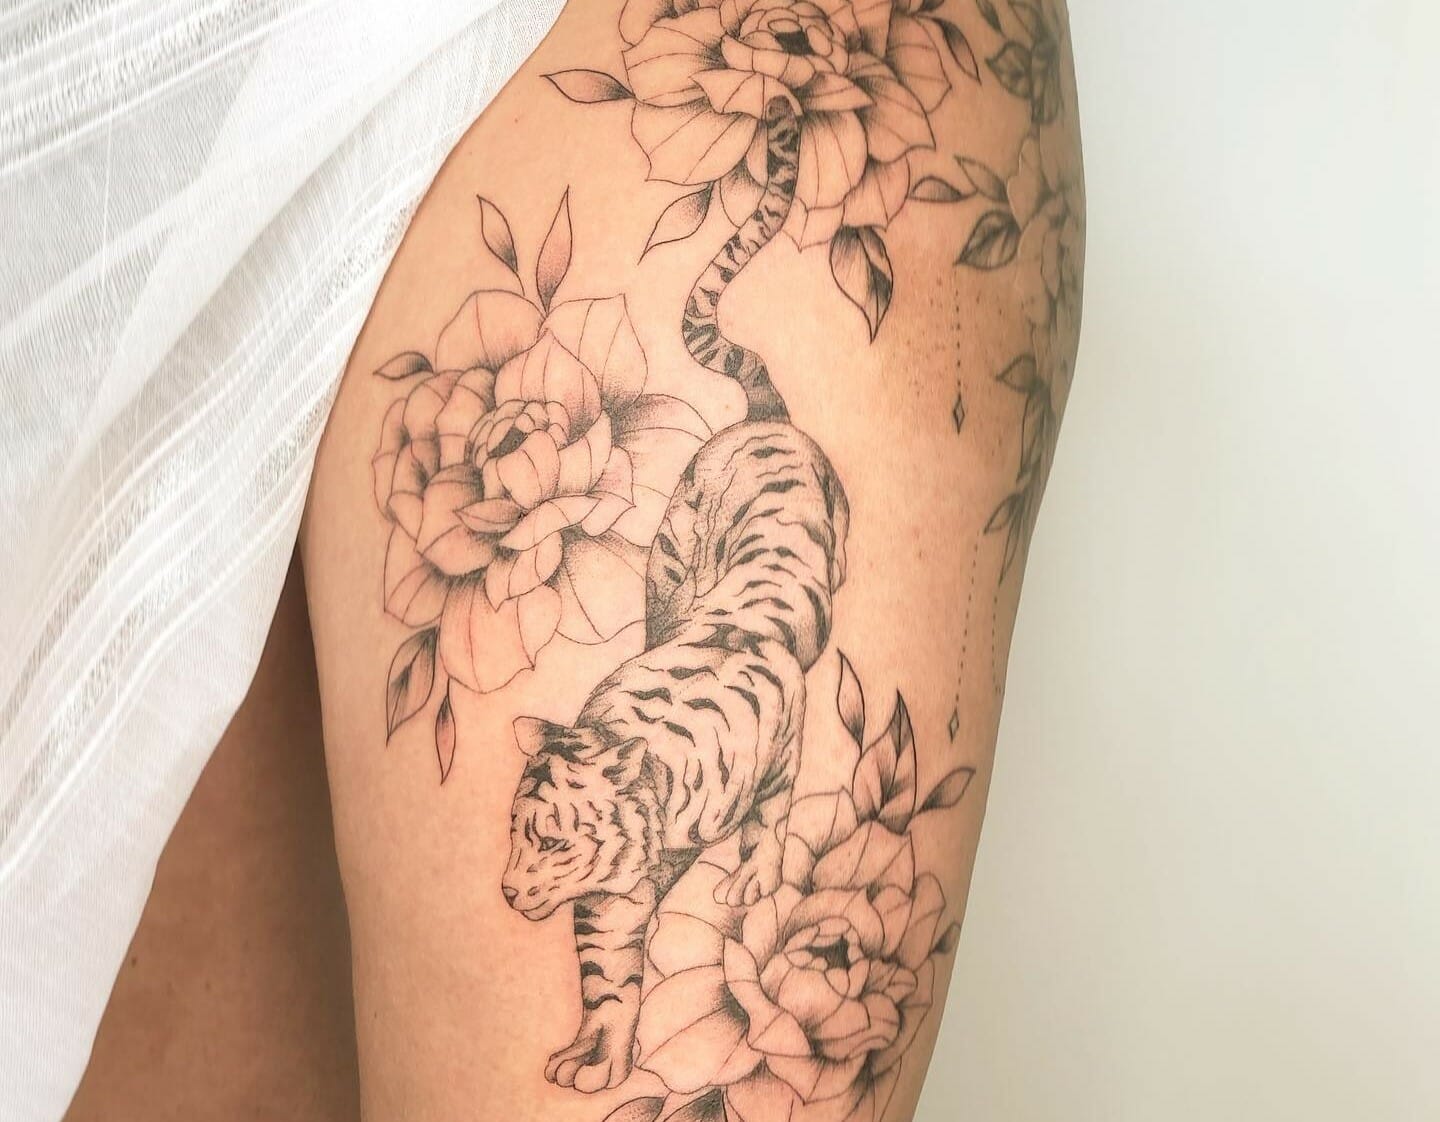 101 Best Tiger Thigh Tattoo Ideas That Will Blow Your Mind!

+2023